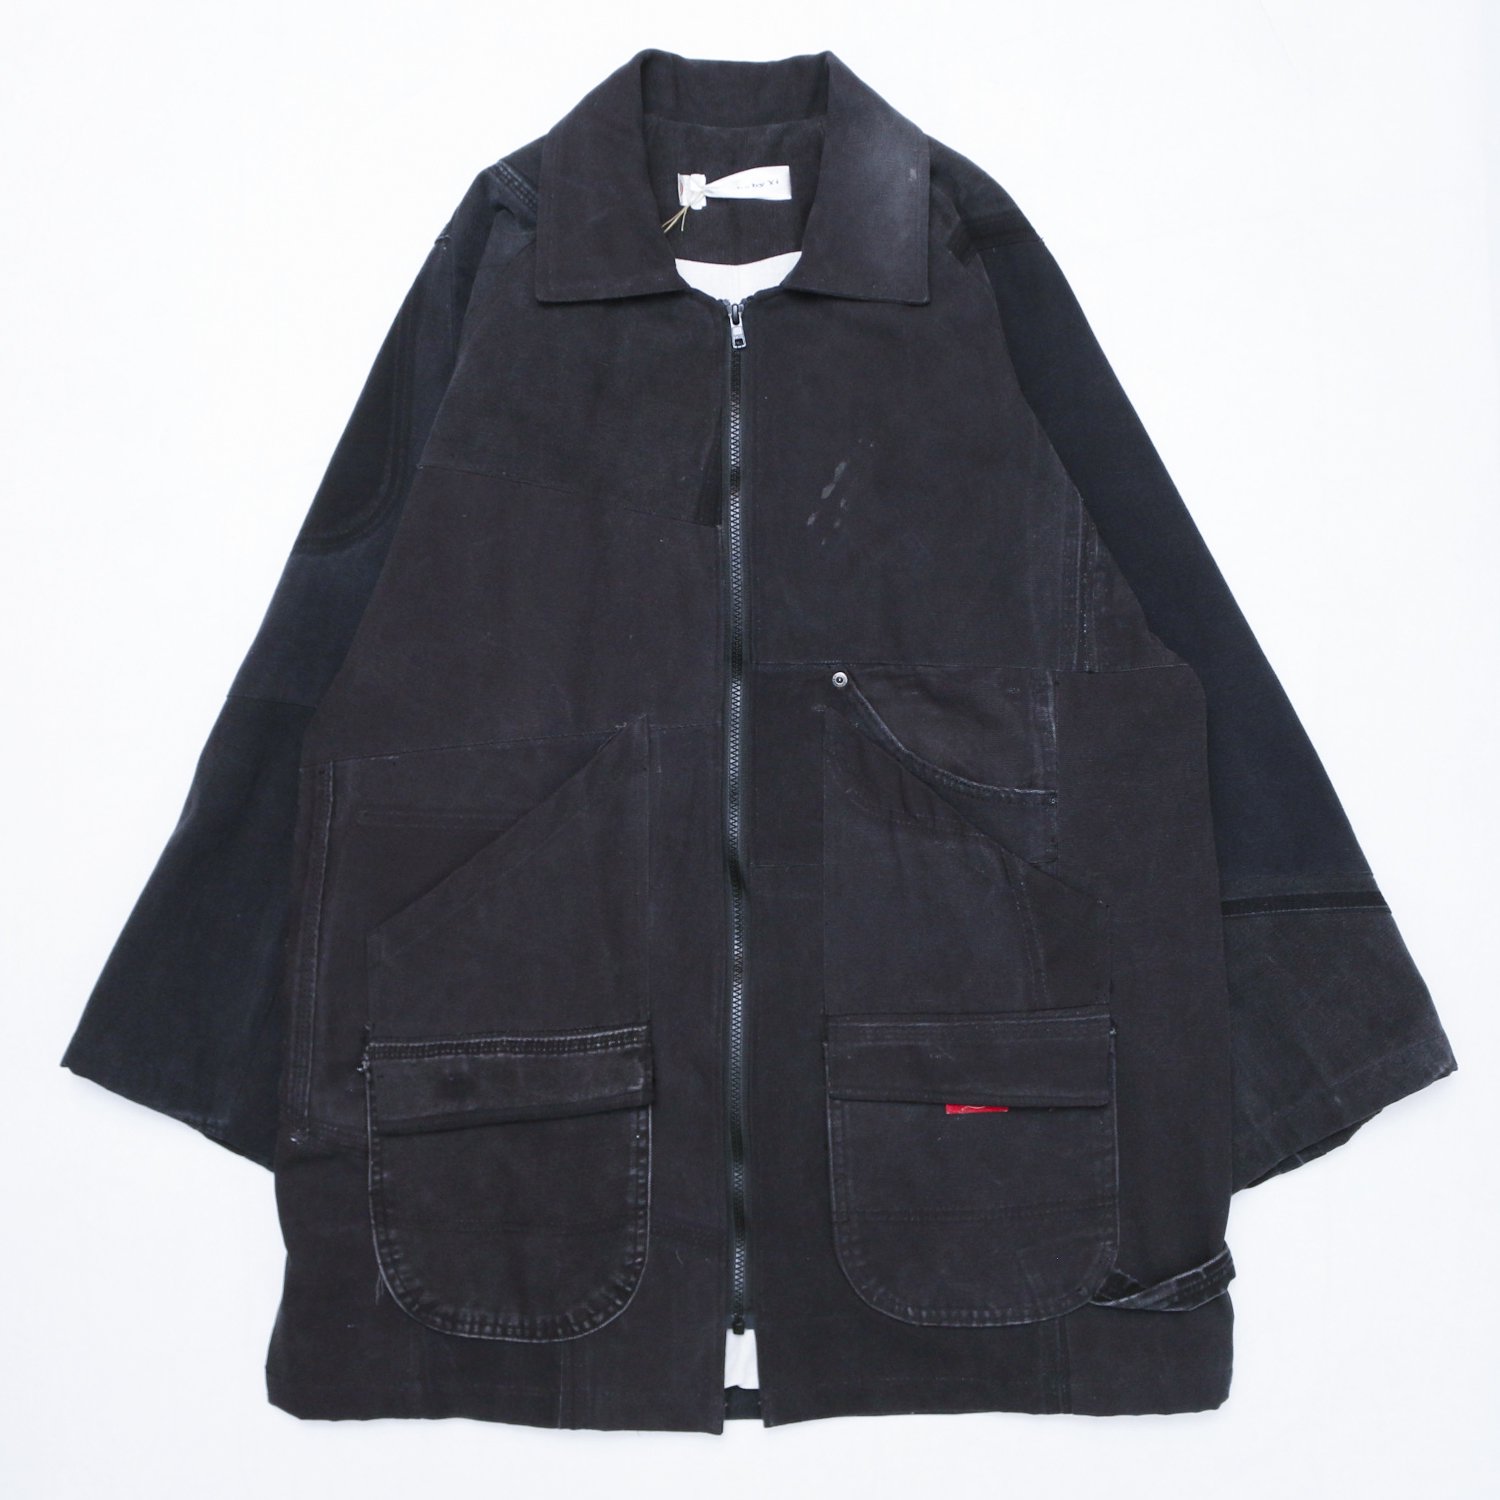 <img class='new_mark_img1' src='https://img.shop-pro.jp/img/new/icons8.gif' style='border:none;display:inline;margin:0px;padding:0px;width:auto;' />Remake by Yi / Work Coat (Dickies)  